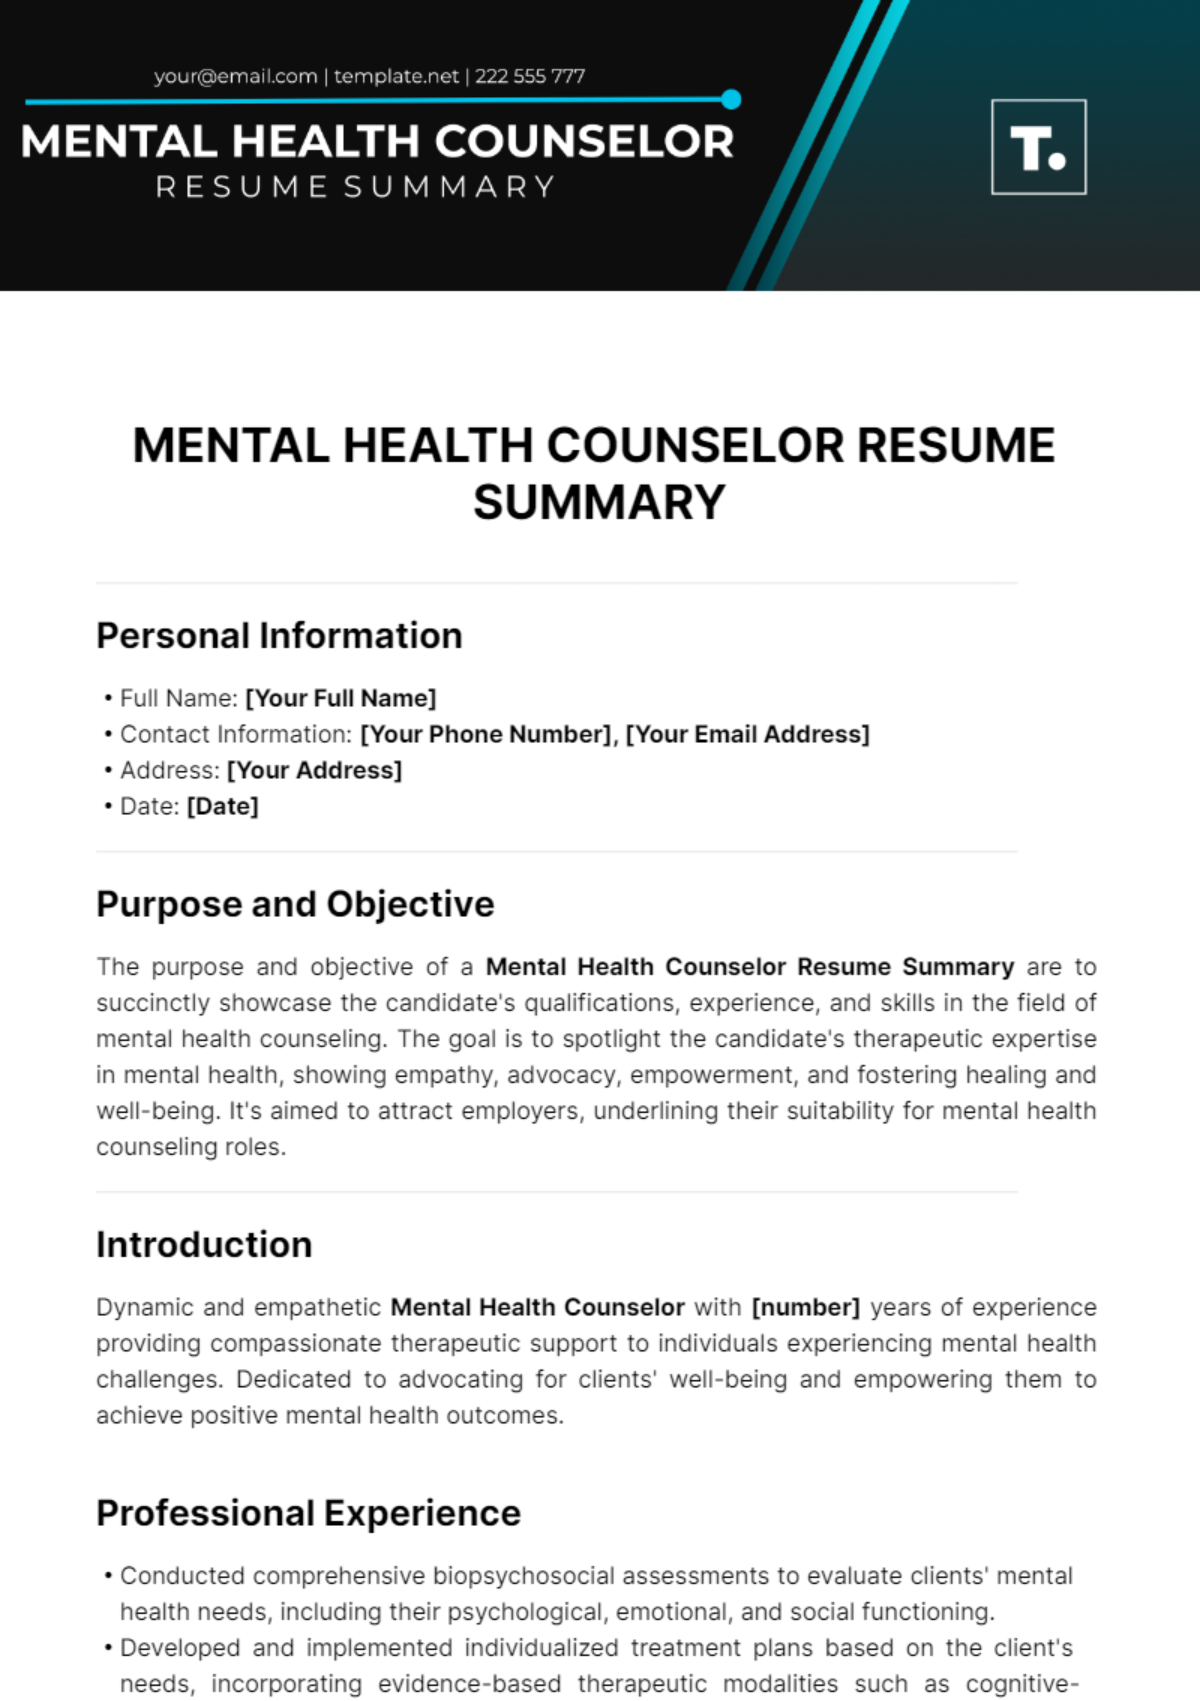 Mental Health Counselor Resume Summary Template